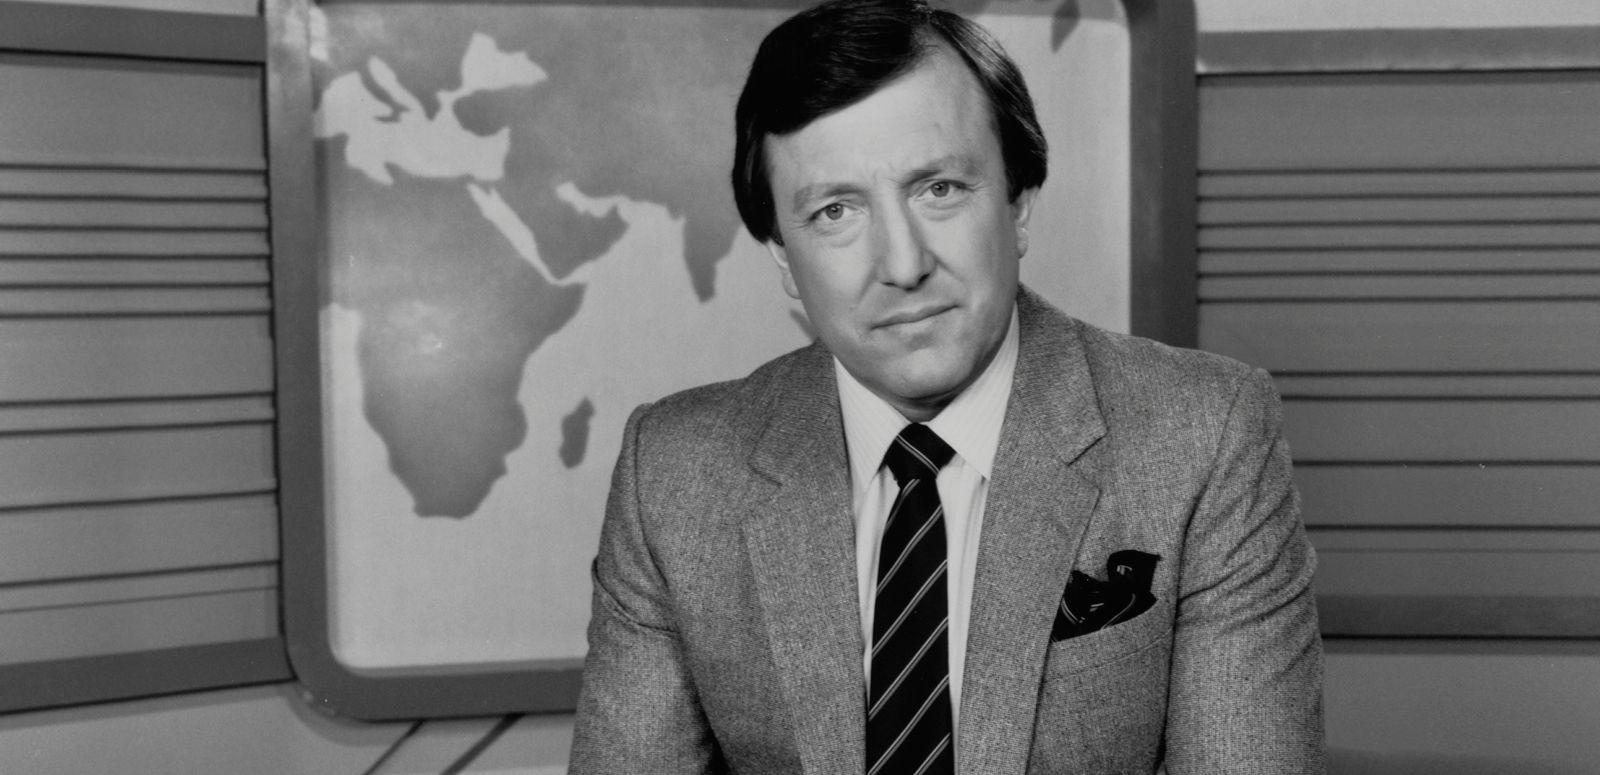 Journalist Jim Waley is wearing a suit and tie in this black and white photo. He is sitting in a studio with a backdrop showing a map of the world.